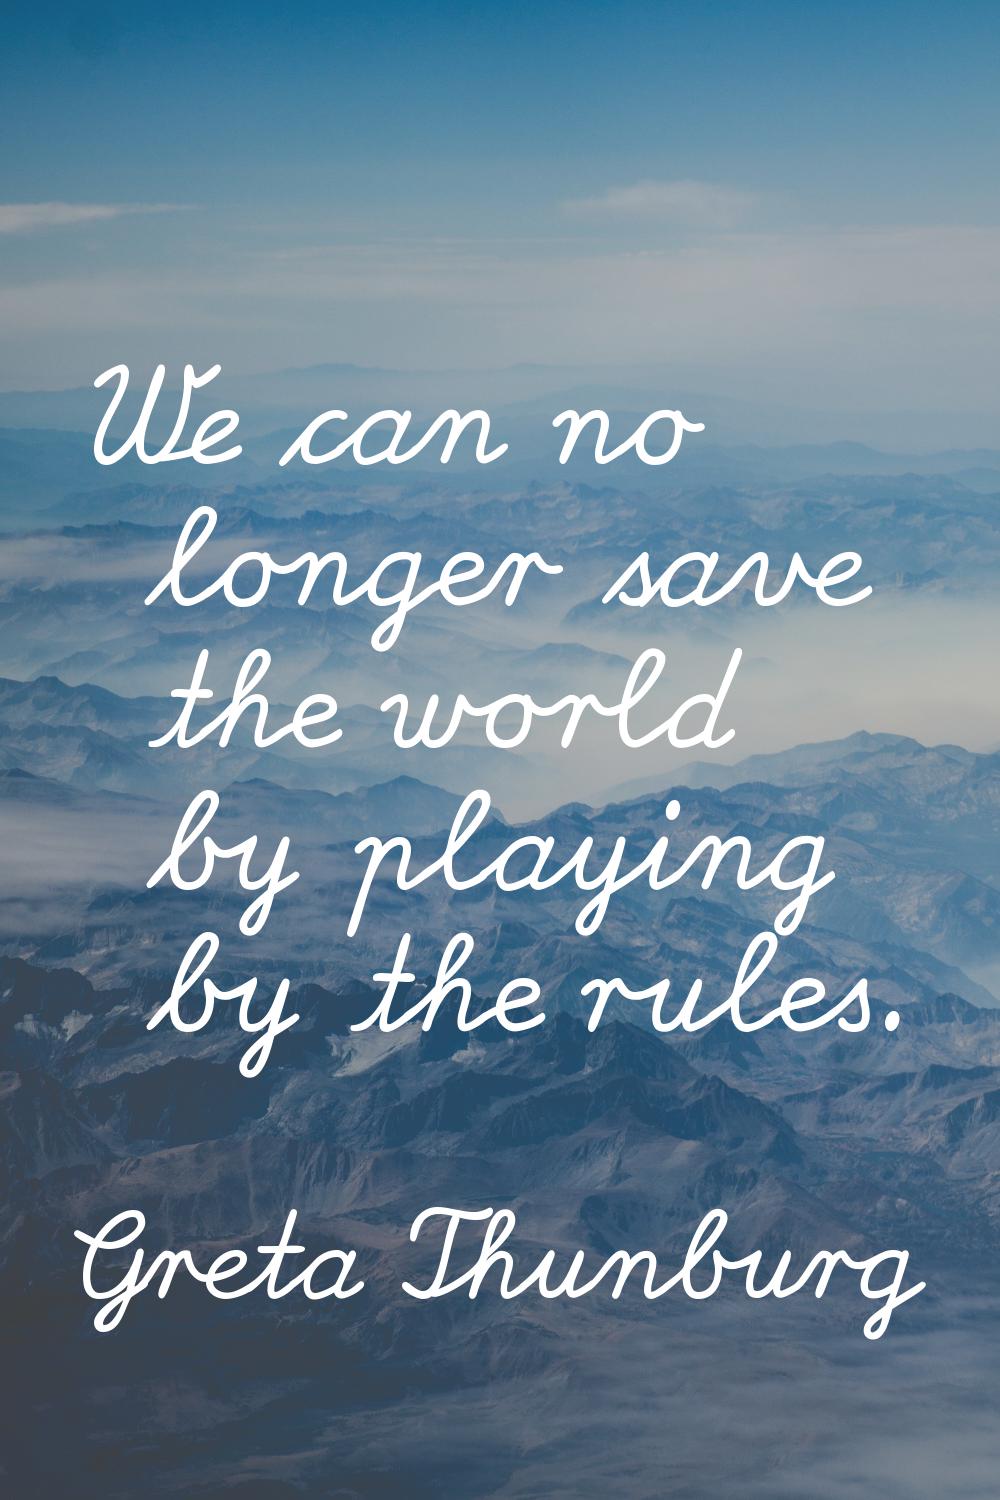 We can no longer save the world by playing by the rules.